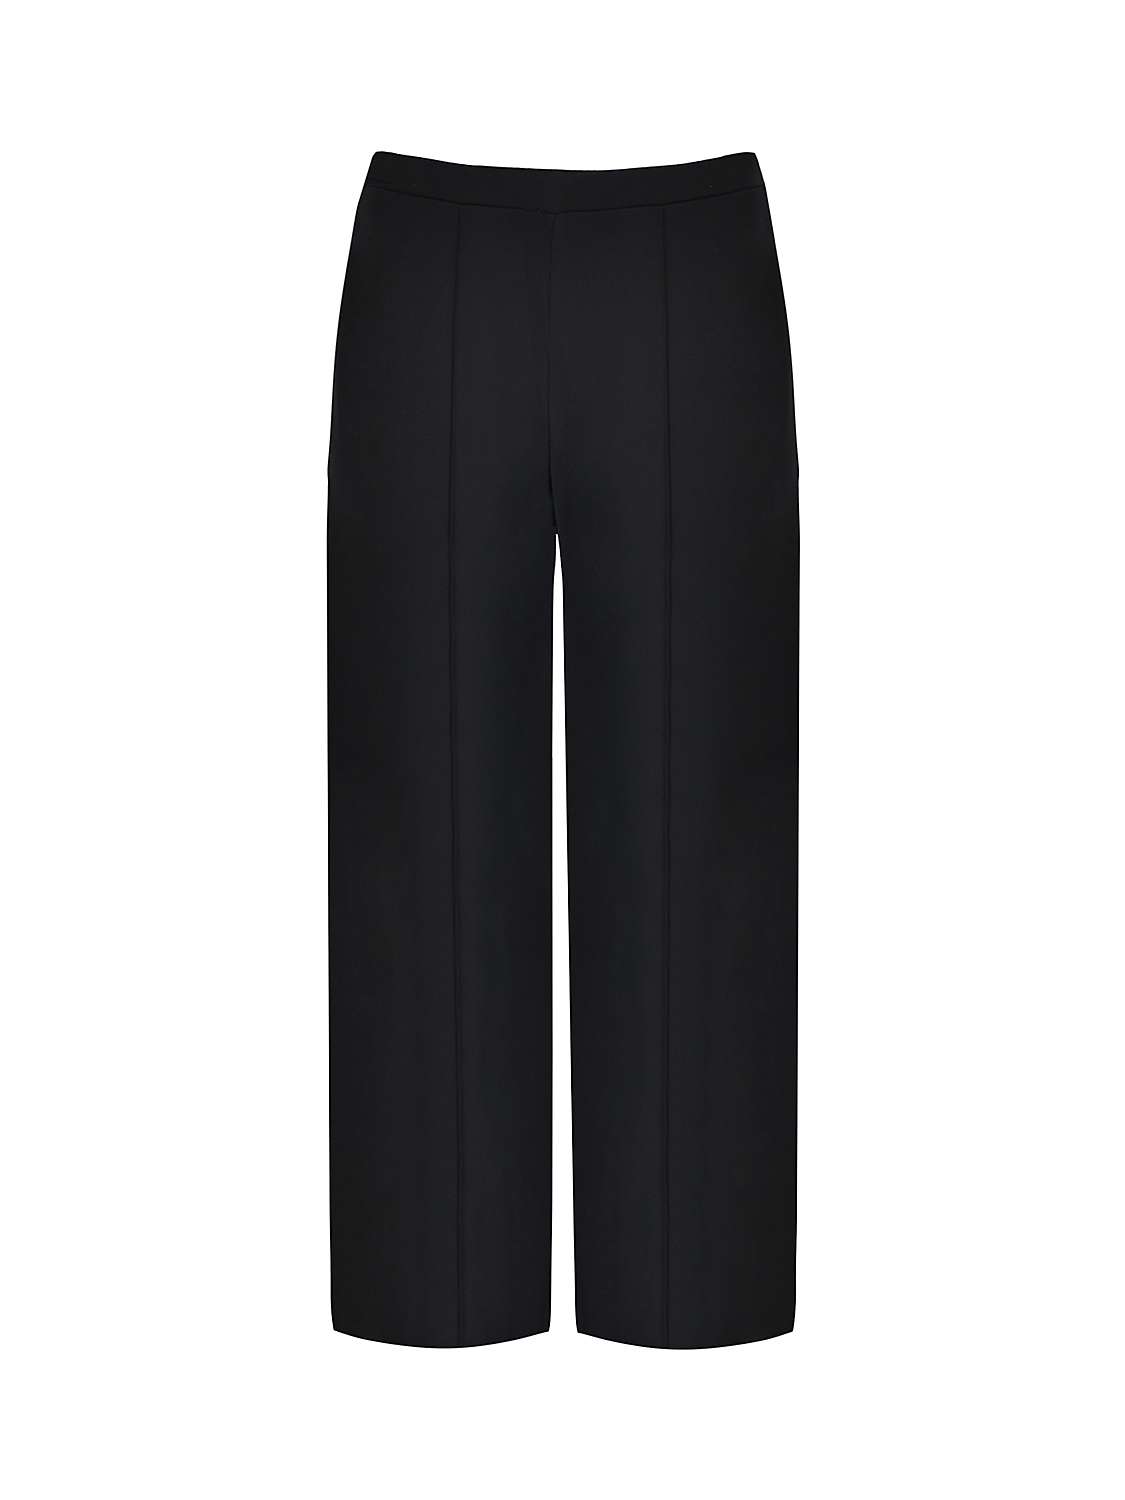 Buy Live Unlimited Curve Bootleg Trousers, Black Online at johnlewis.com